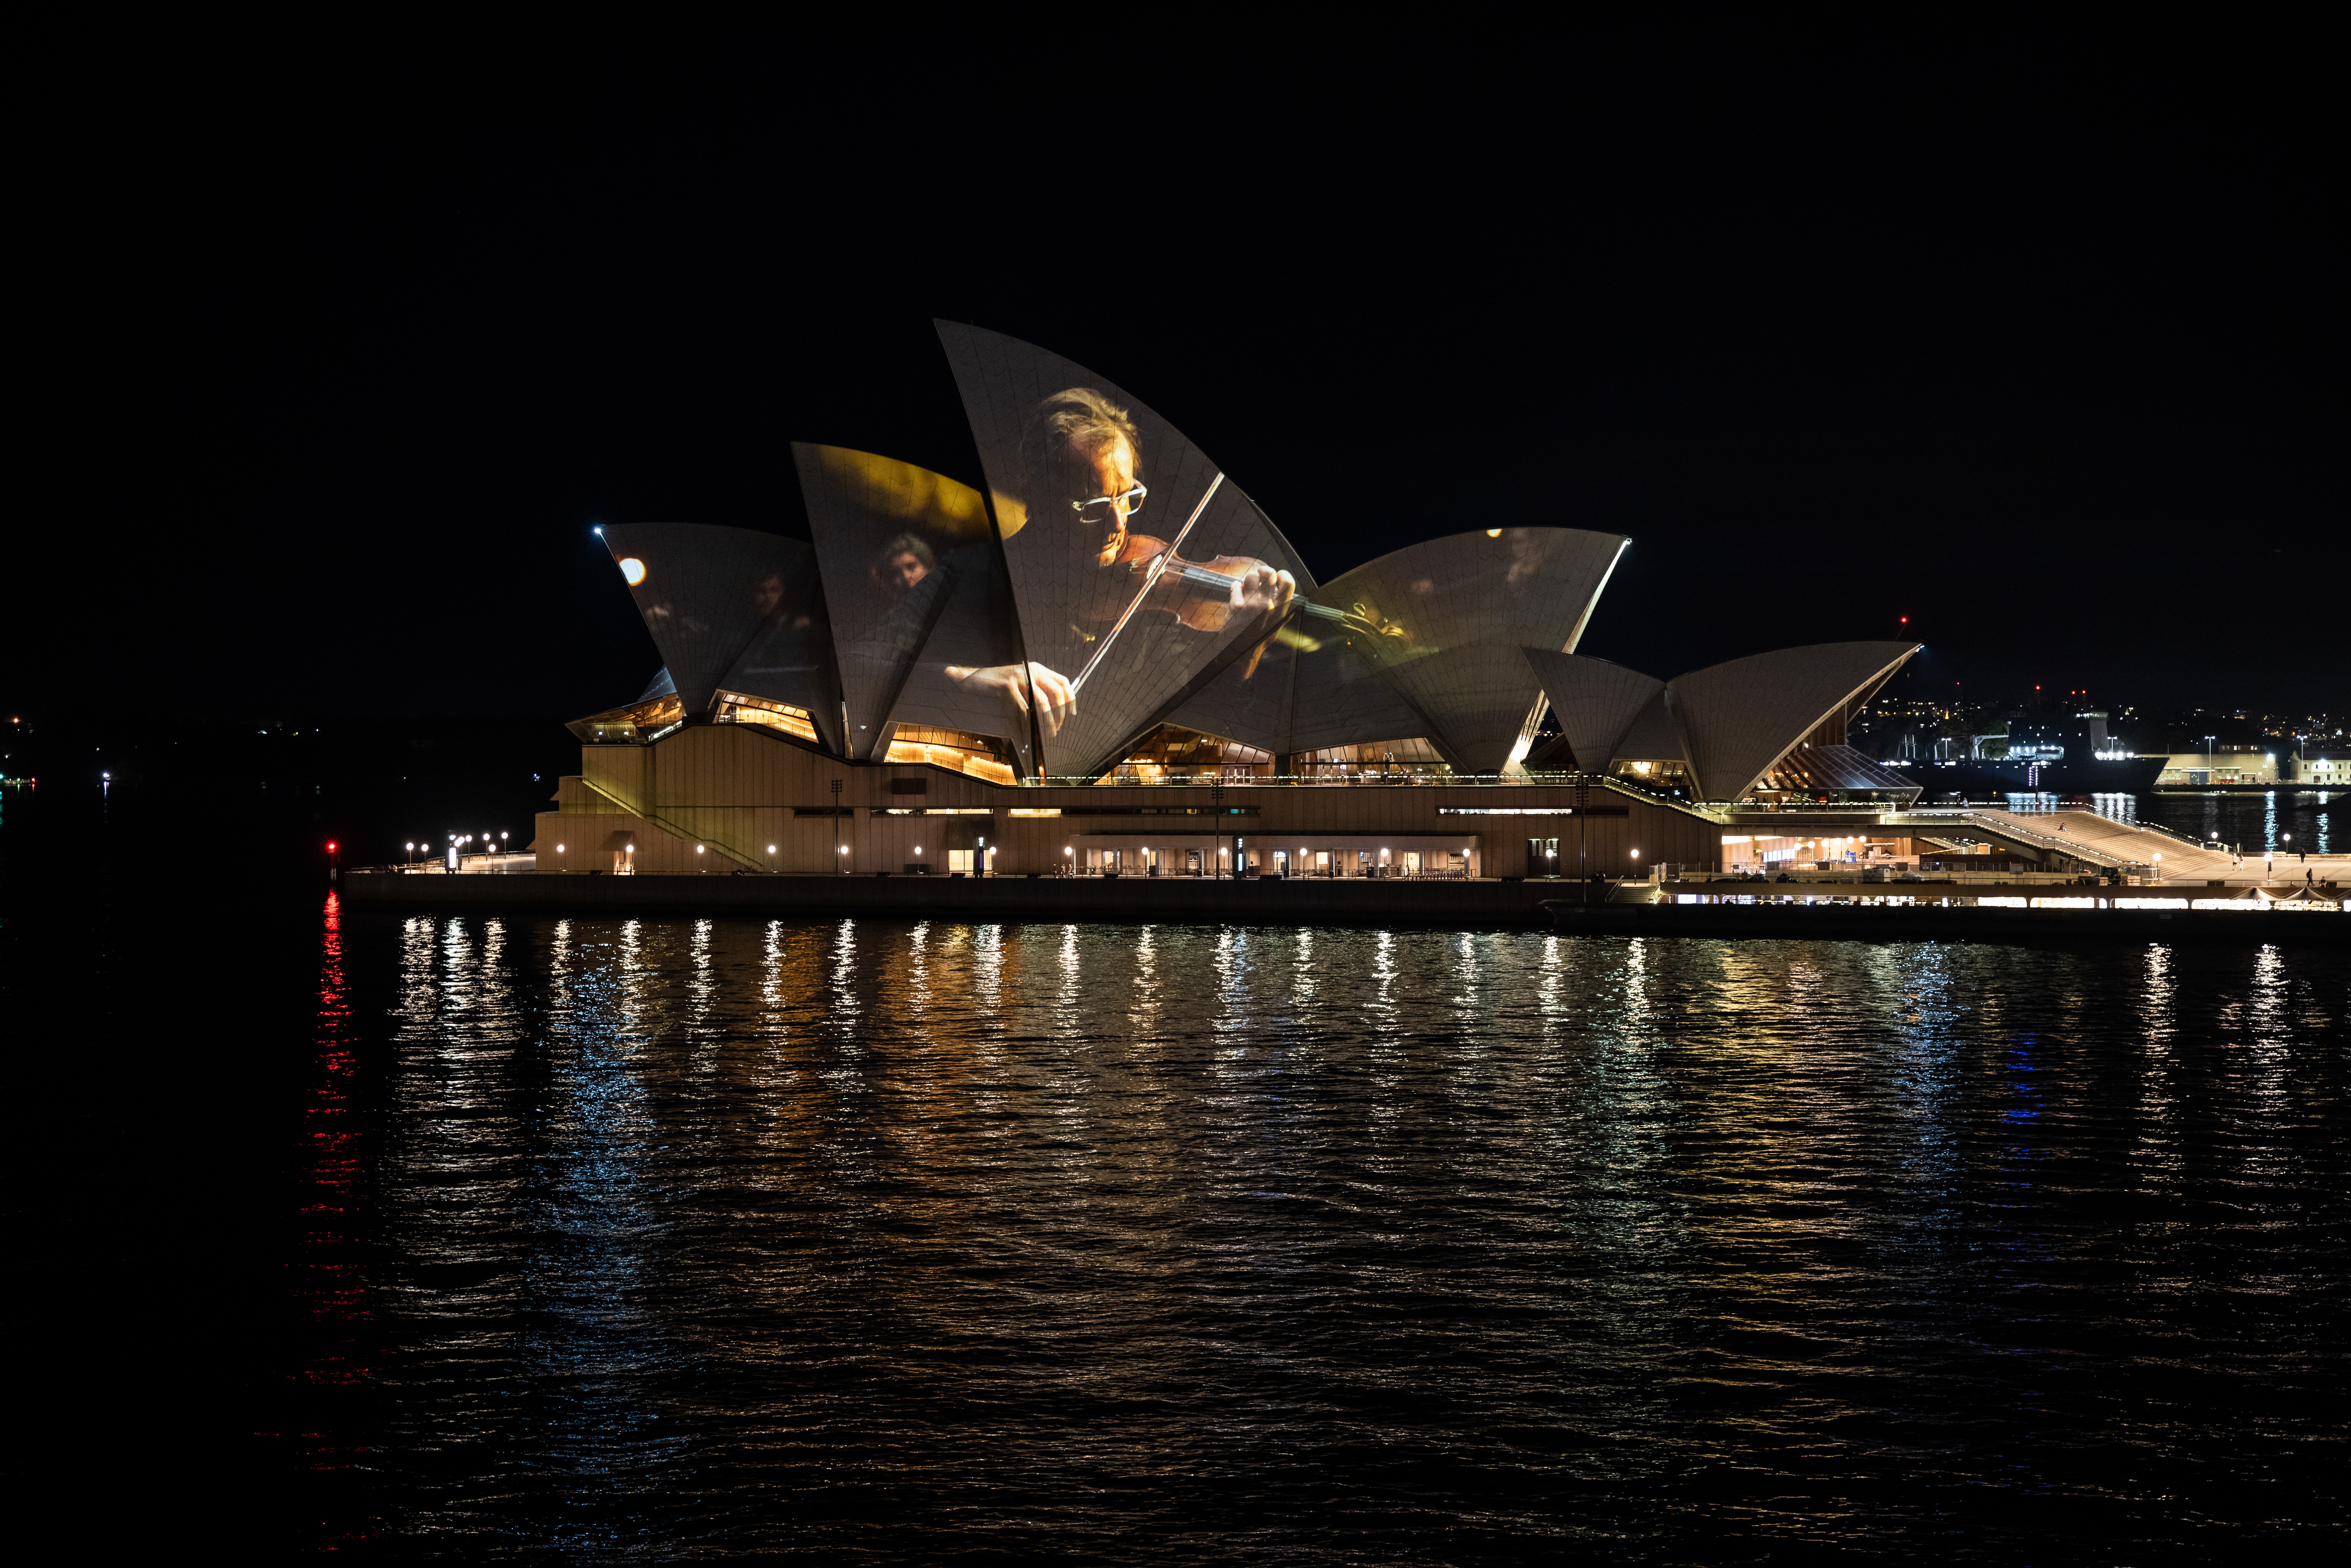 ACO projected on Sydney Opera House sails